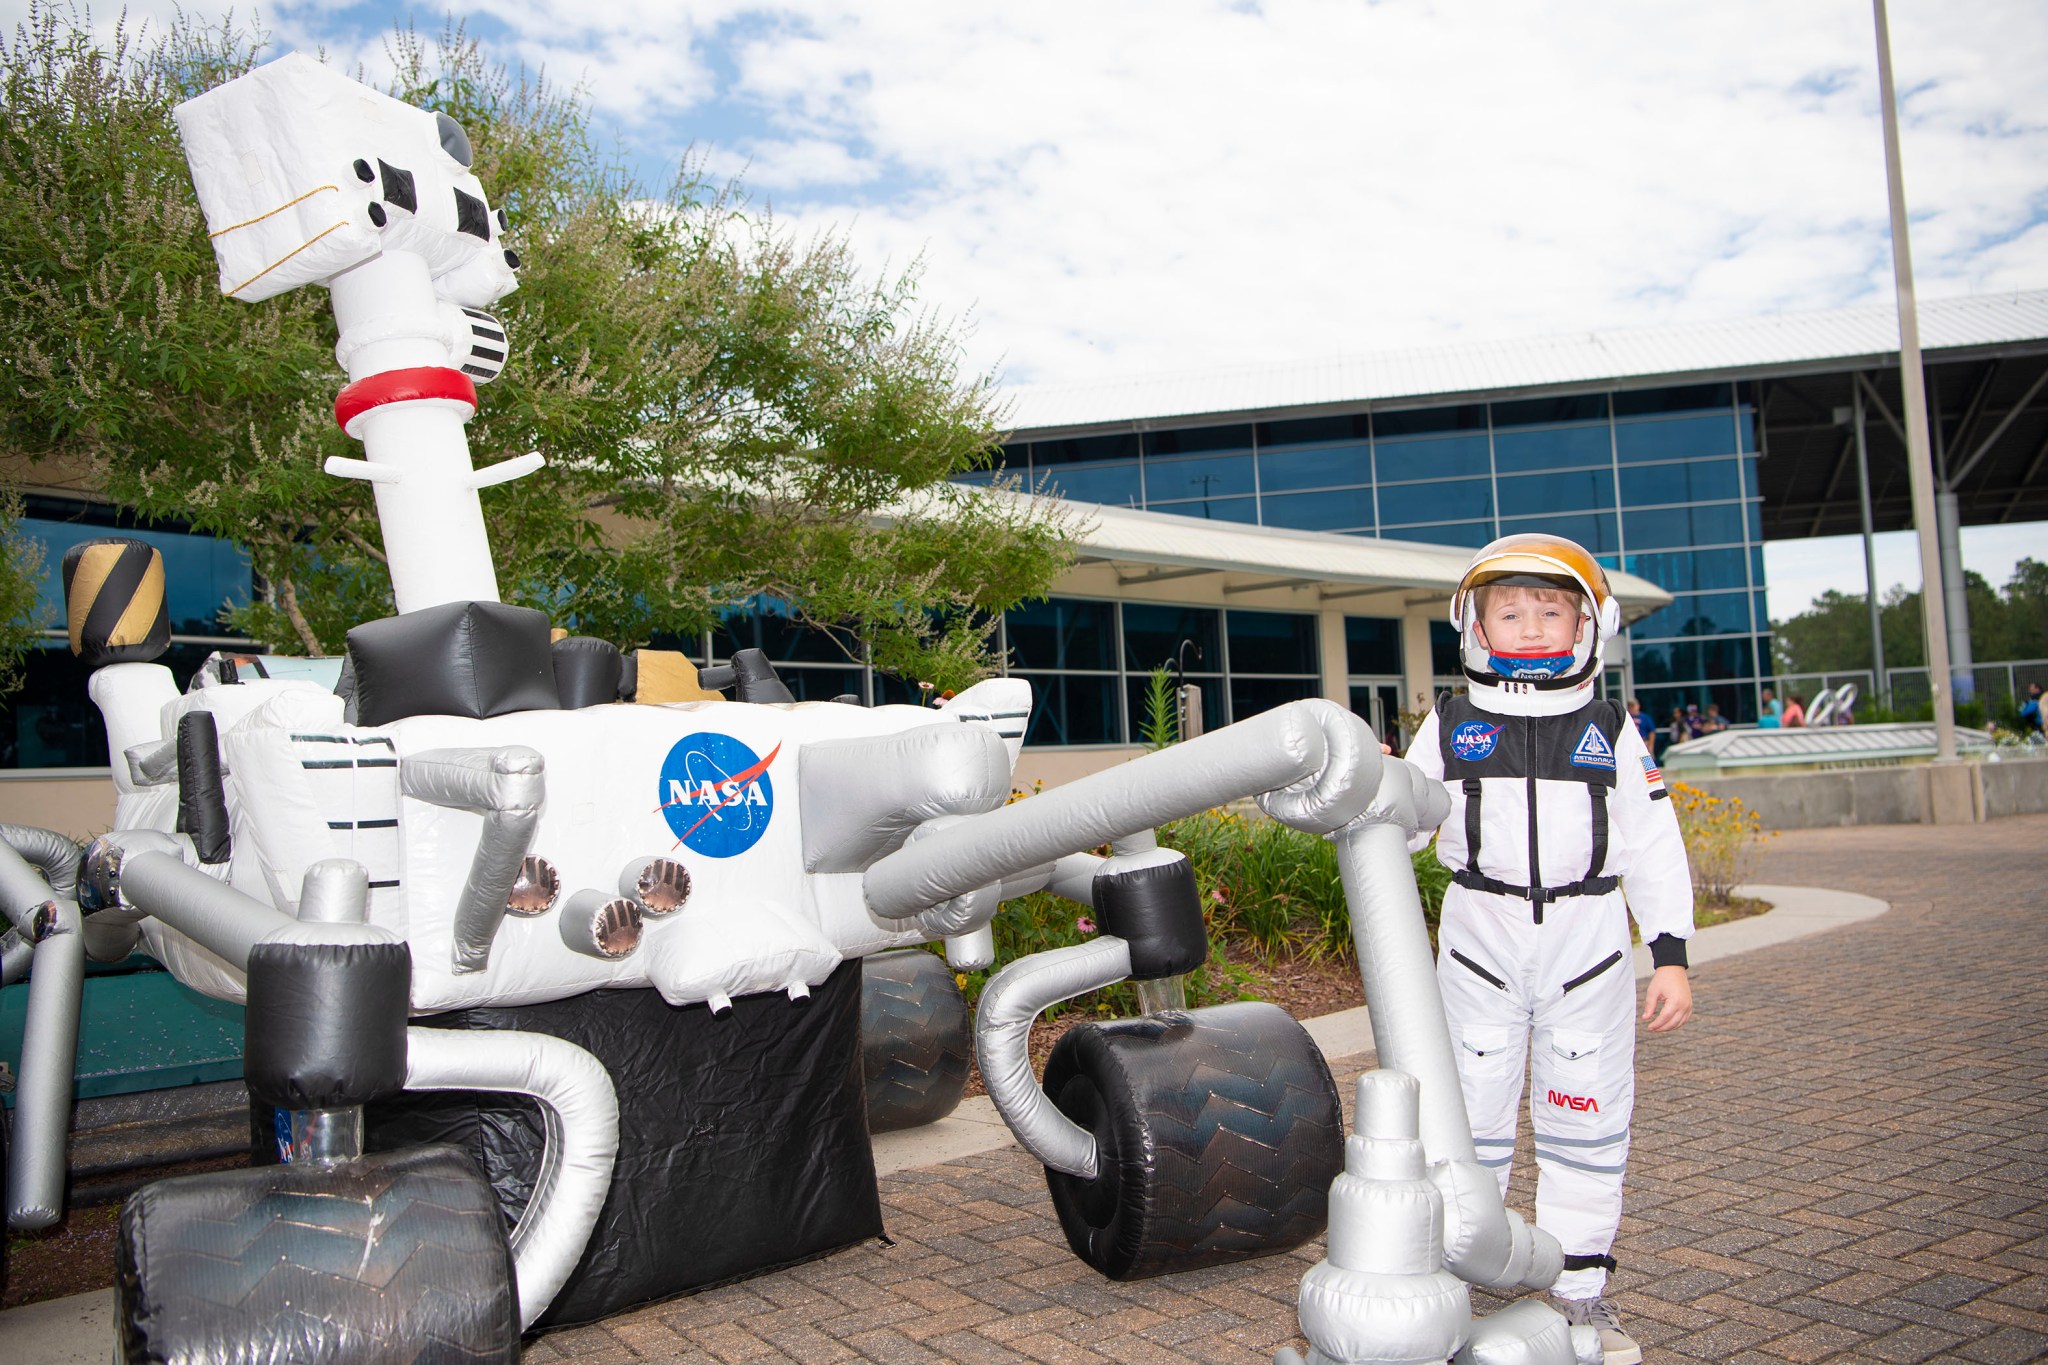 inflatable Mars Rover outside of INFINITY Science Center